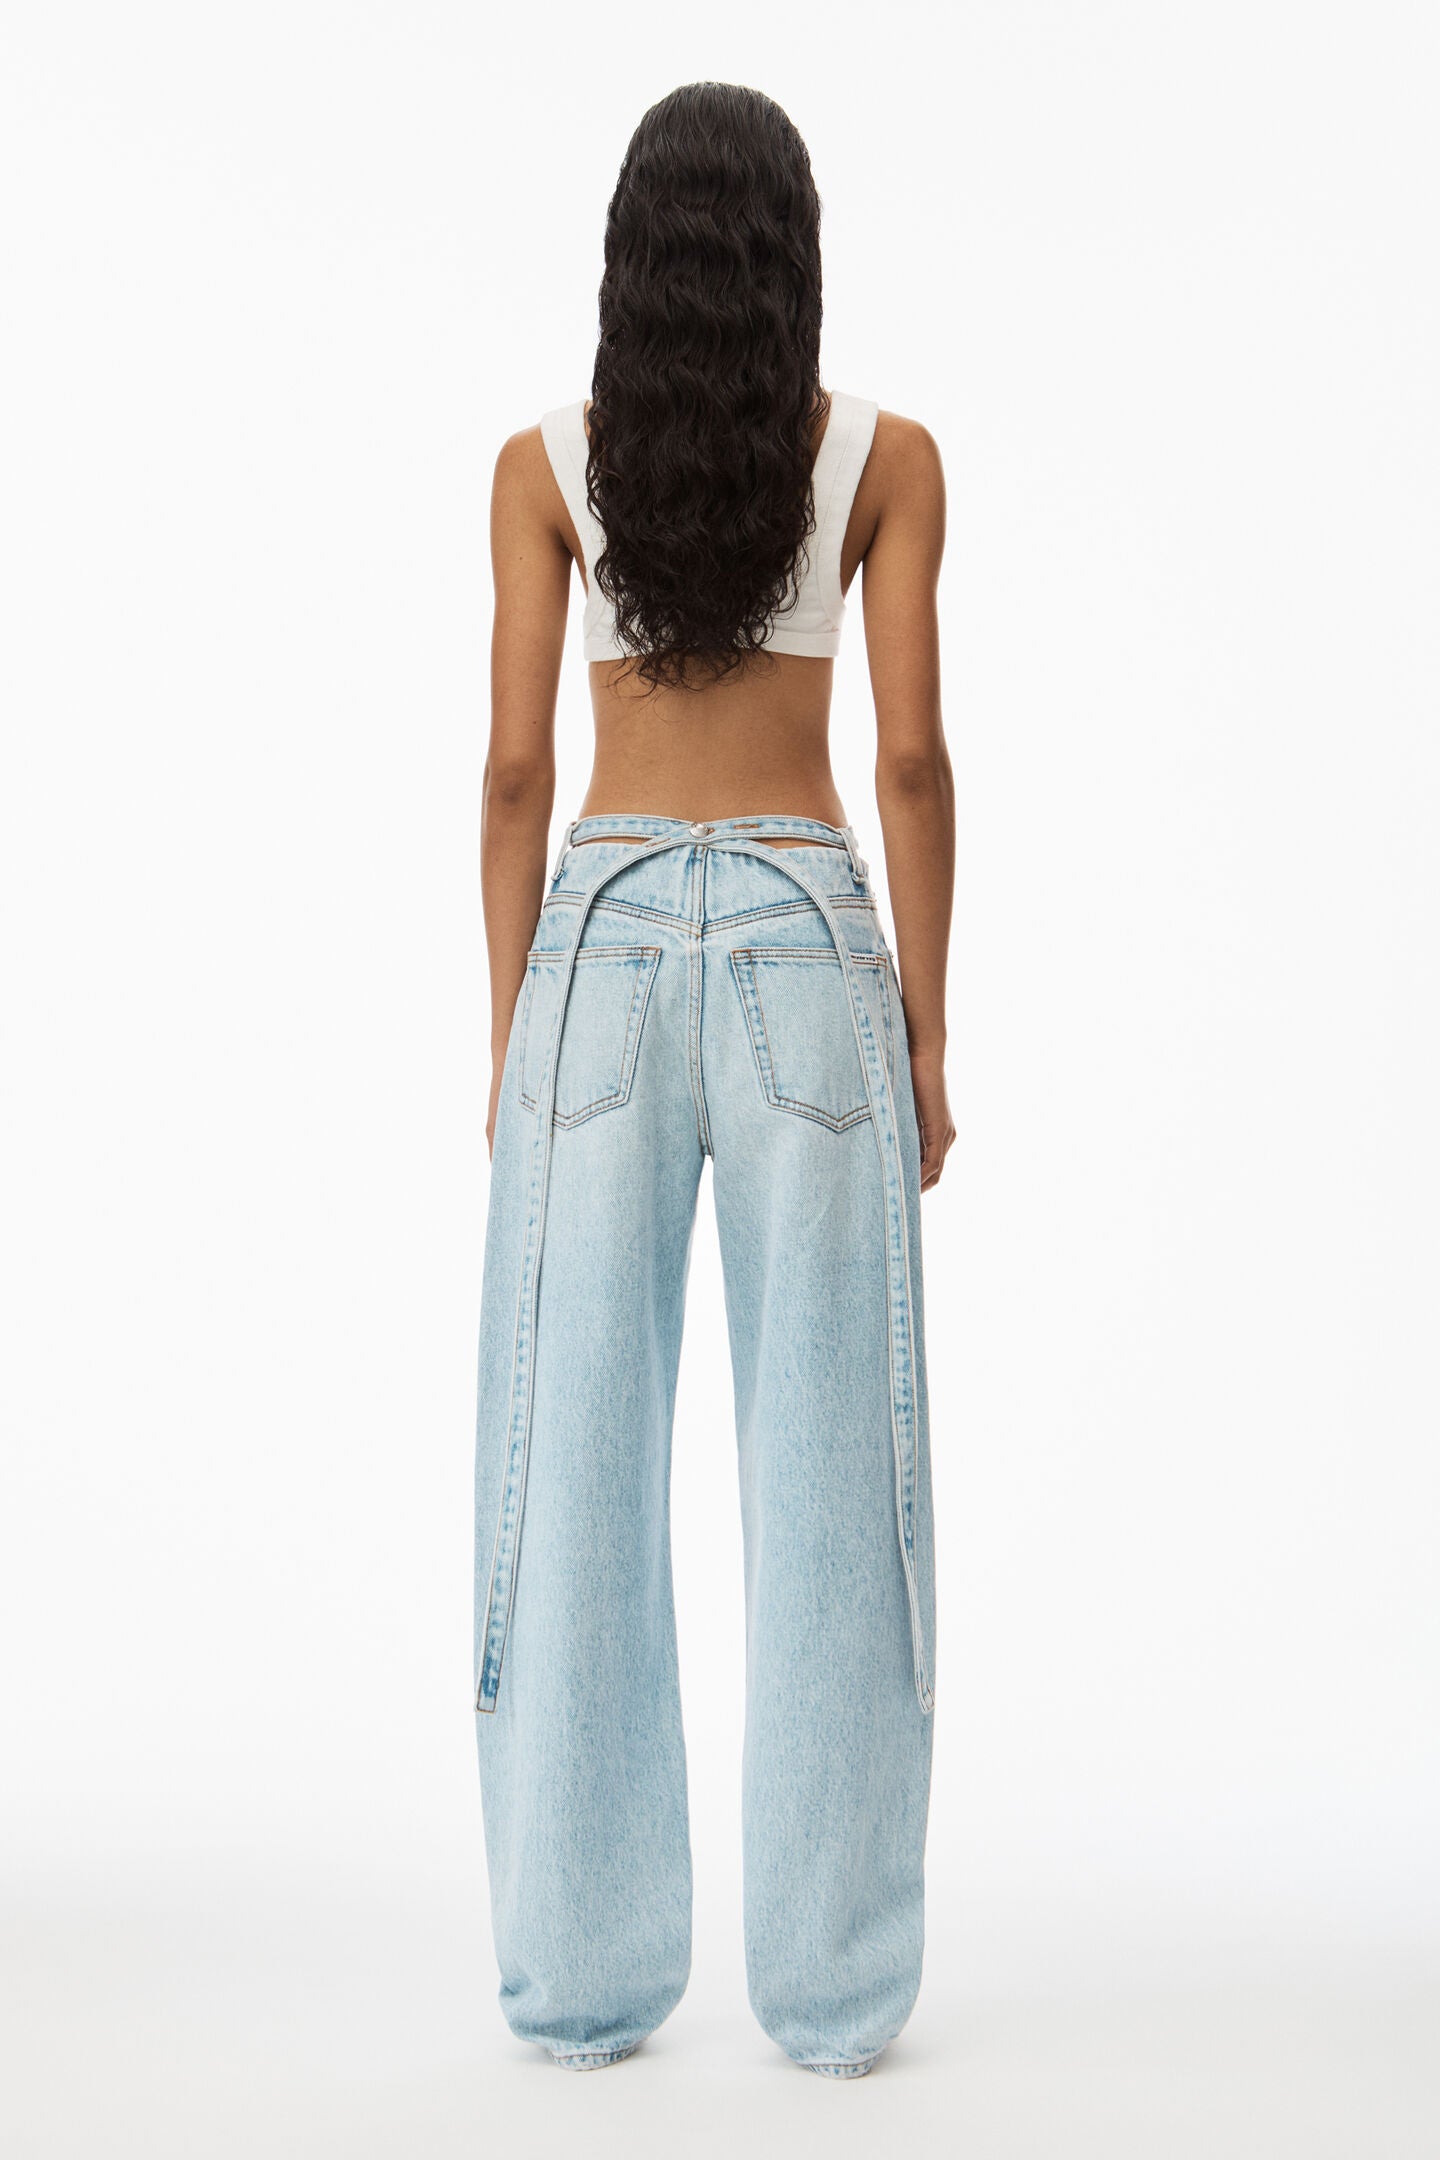 Alexander Wang STACK TIE JEAN DENIM | Official Site | Clothes design,  Outfit accessories, How to wear